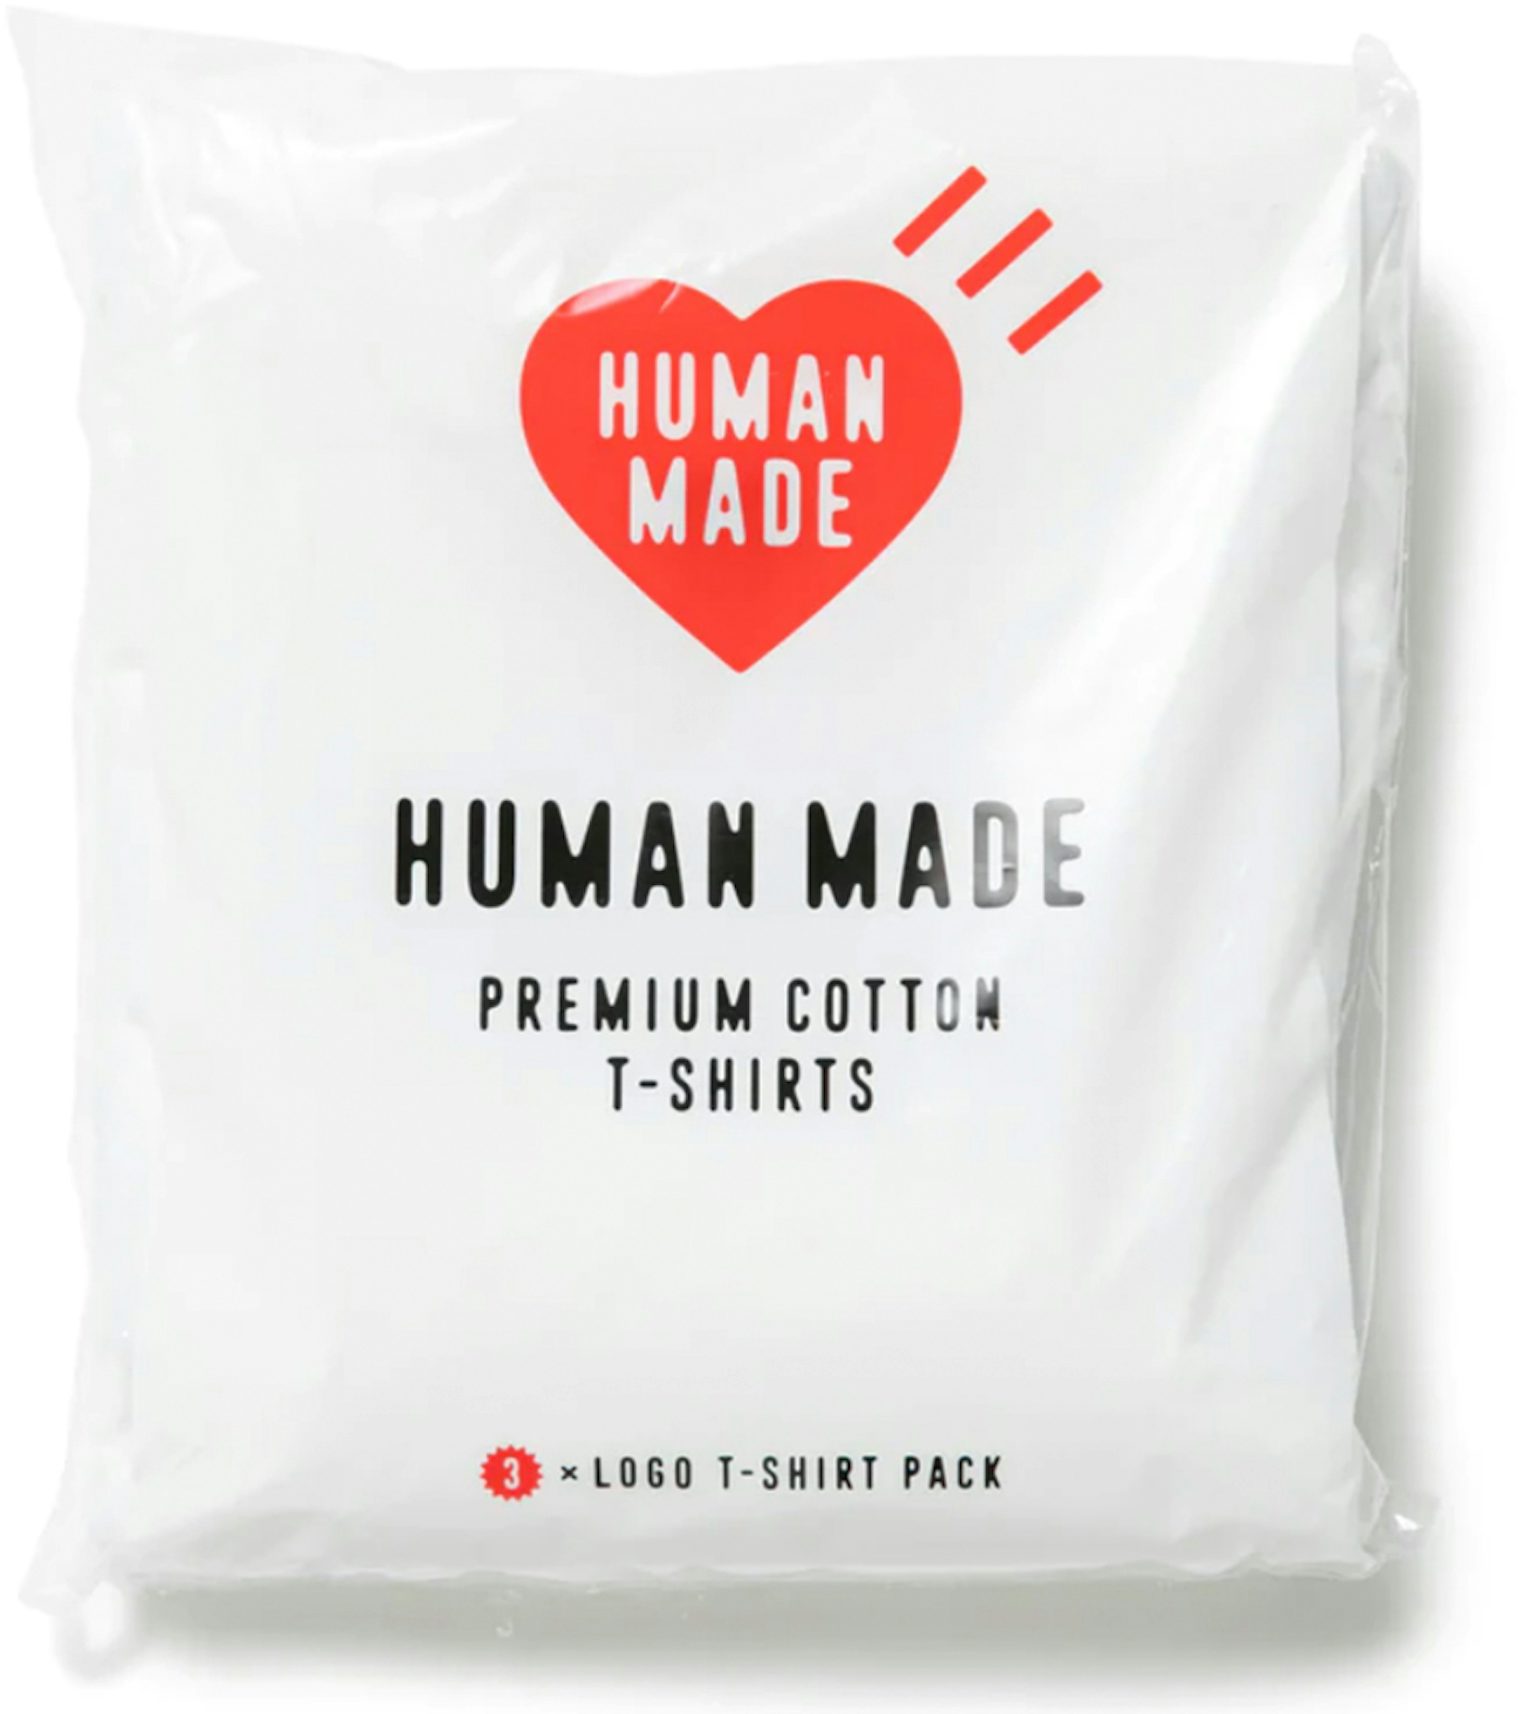 Human Made Heart Pile T-shirt in Black for Men